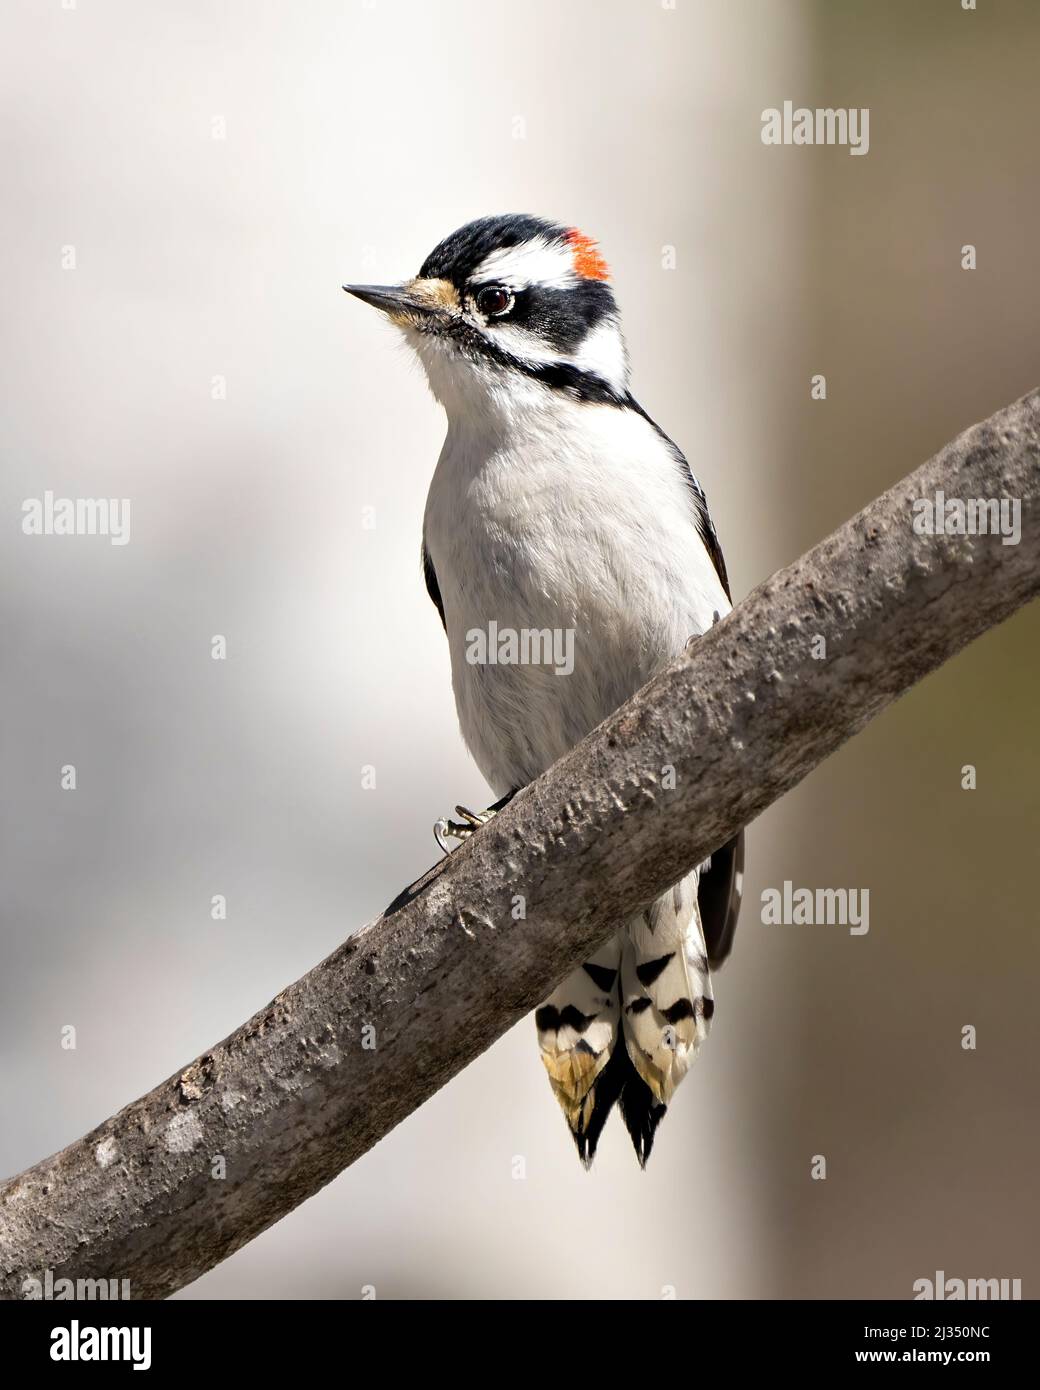 Downy Woodpecker male on a branch with a blur background in its environment and habitat surrounding displaying white and black feather plumage wings. Stock Photo